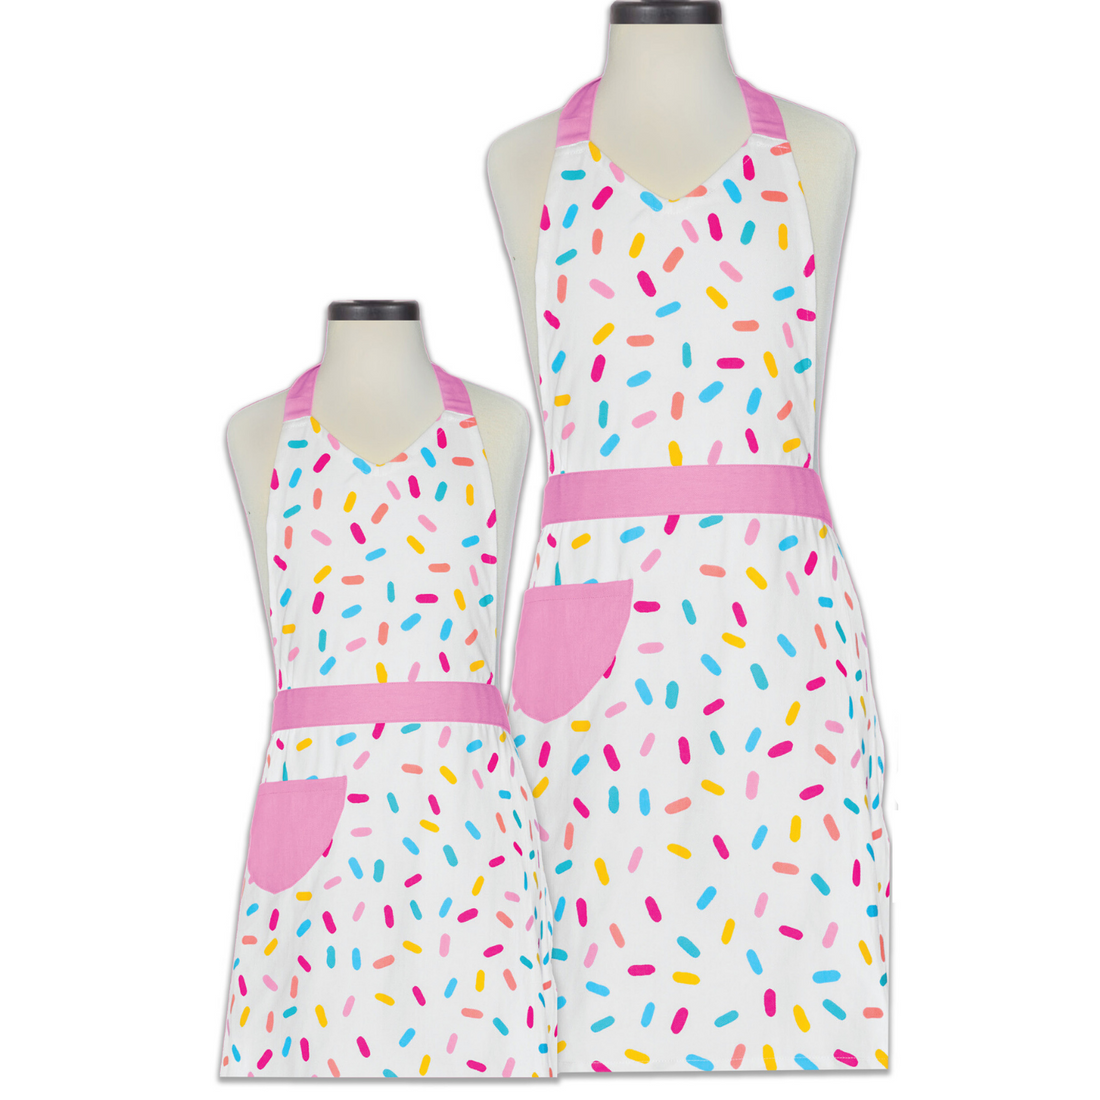 Sprinkle Cake Printed Adult and Child Matching Apron Set